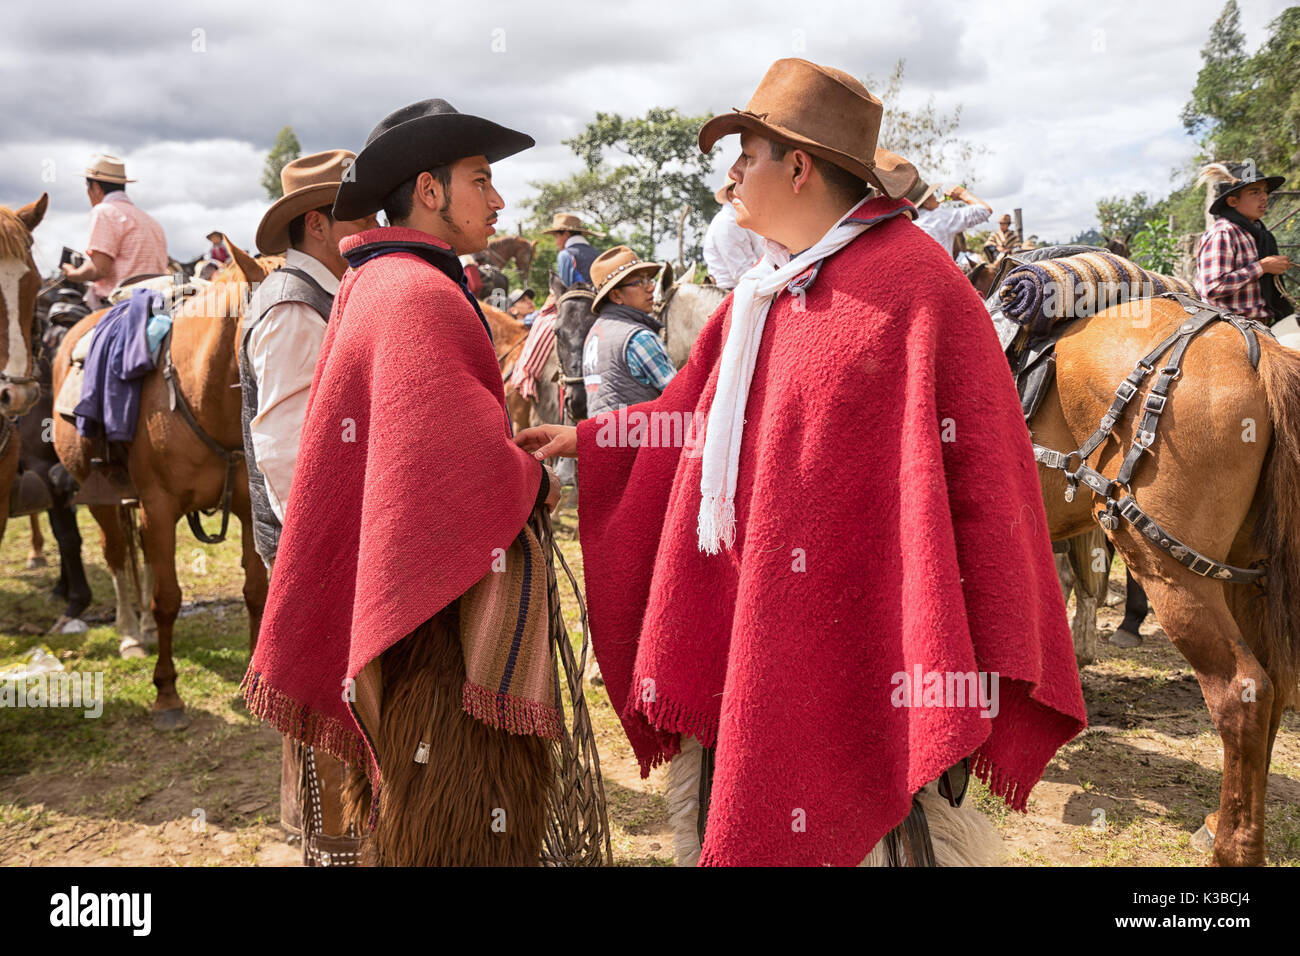 May 27, 2017 Sangolqui, Ecuador: quechua cowboys in red poncho interacting during a rural rodeo at high altitude Stock Photo